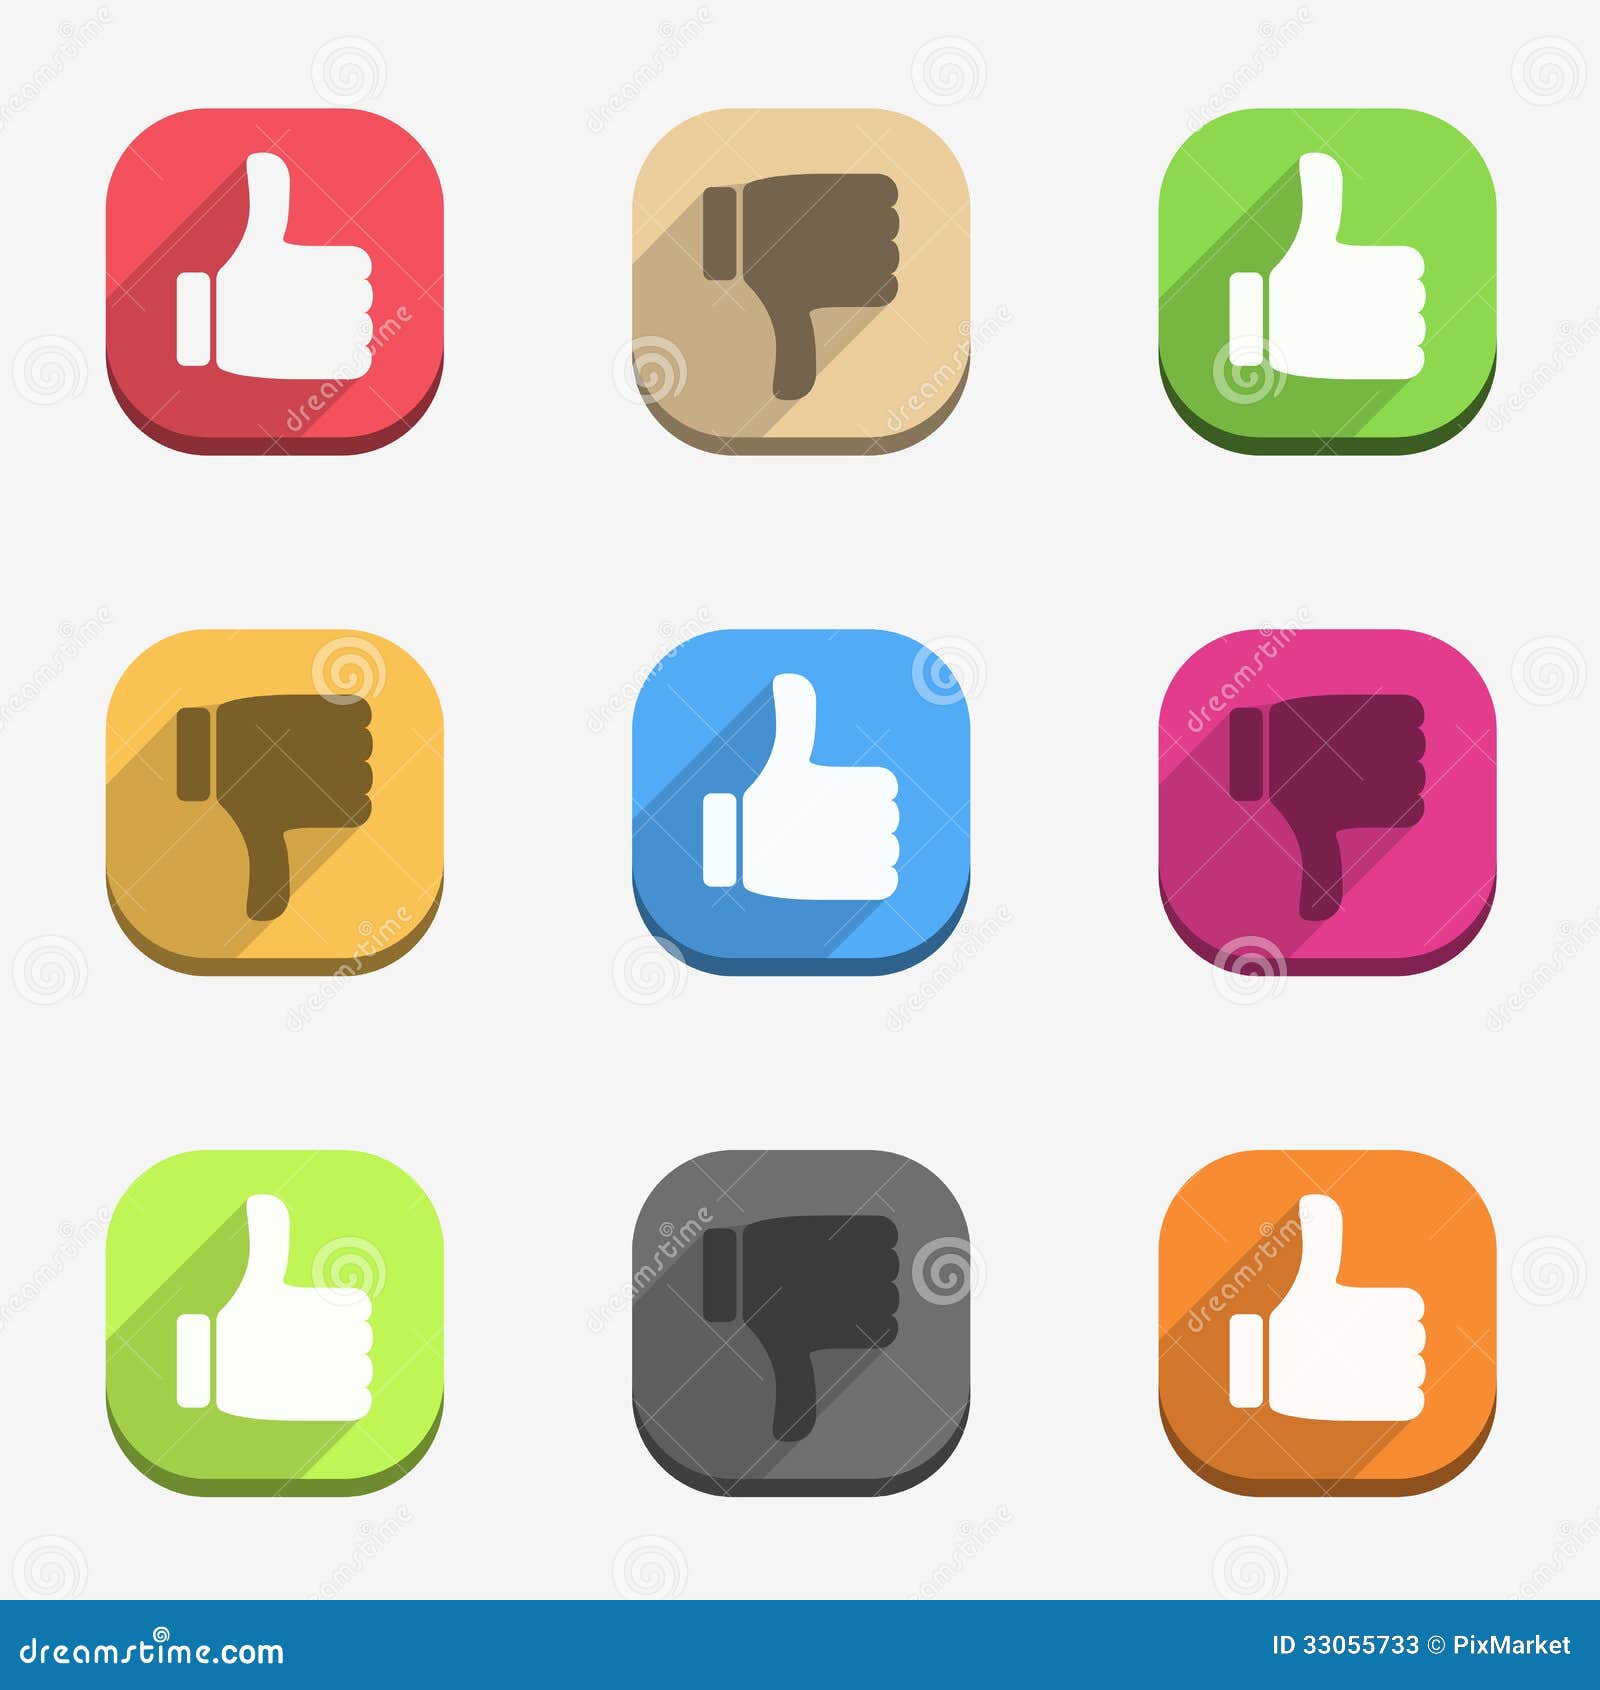 Thumbs Up And Thumbs Down Icons Stock Photos - Image: 33055733